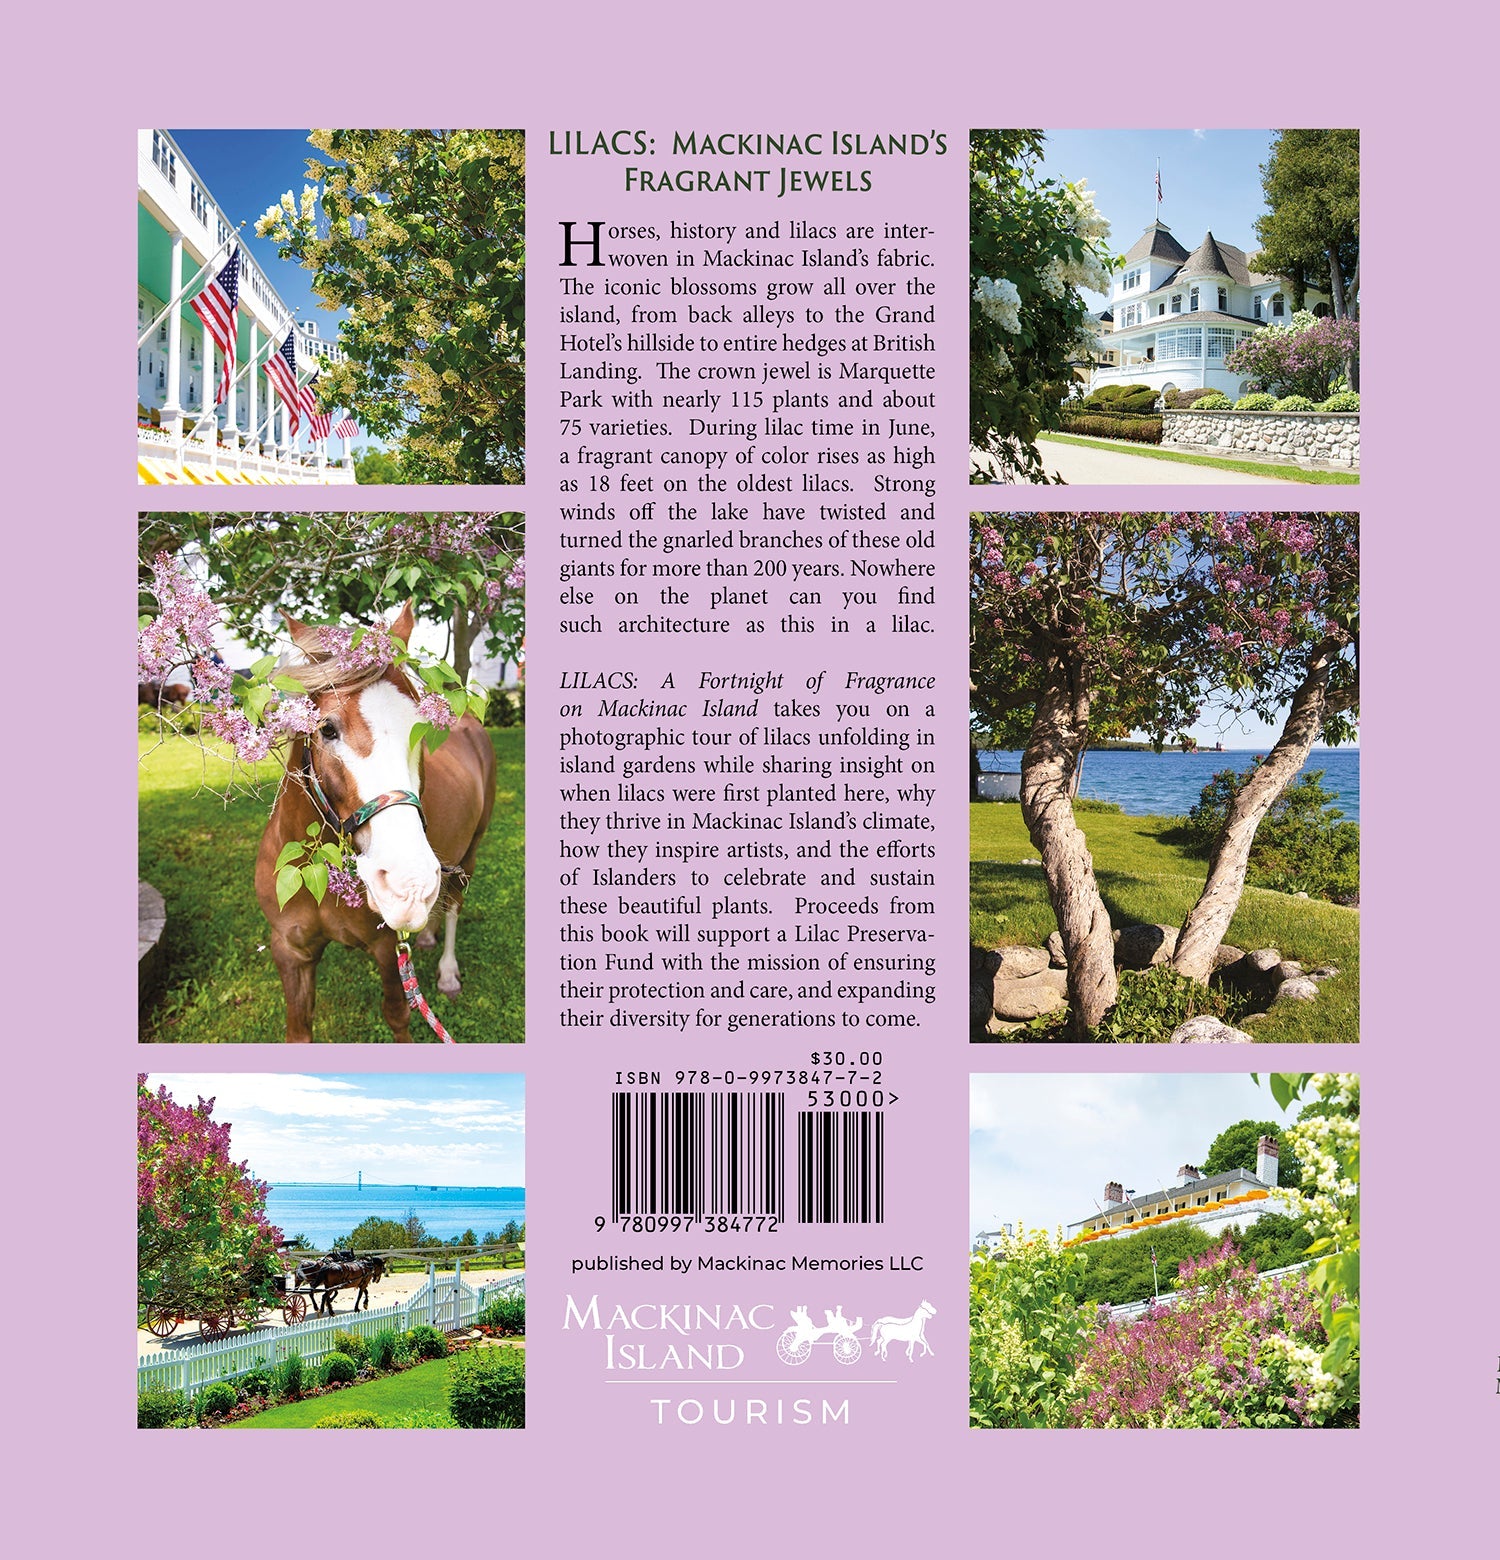 LILACS – A Fortnight of Fragrance on Mackinac Island, takes readers on a photographic tour of the iconic blooms unfolding all over Mackinac Island. Published by Mackinac Memories.